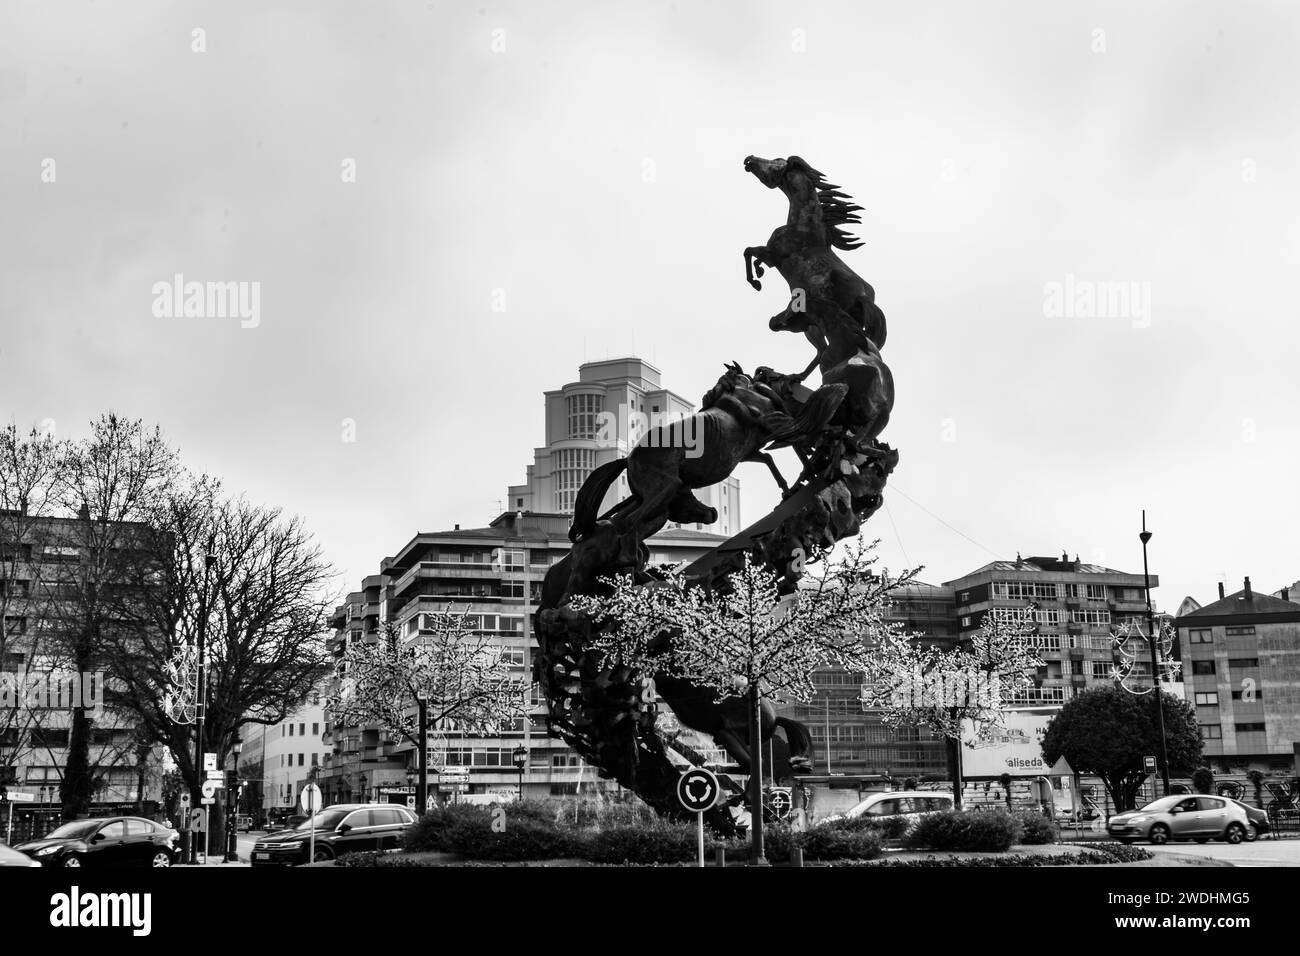 VIGO, SPAIN-December,30,2021: Sculptural group in black bronze forms a kind of ascending metallic spiral that reaches 18 meters in height Stock Photo